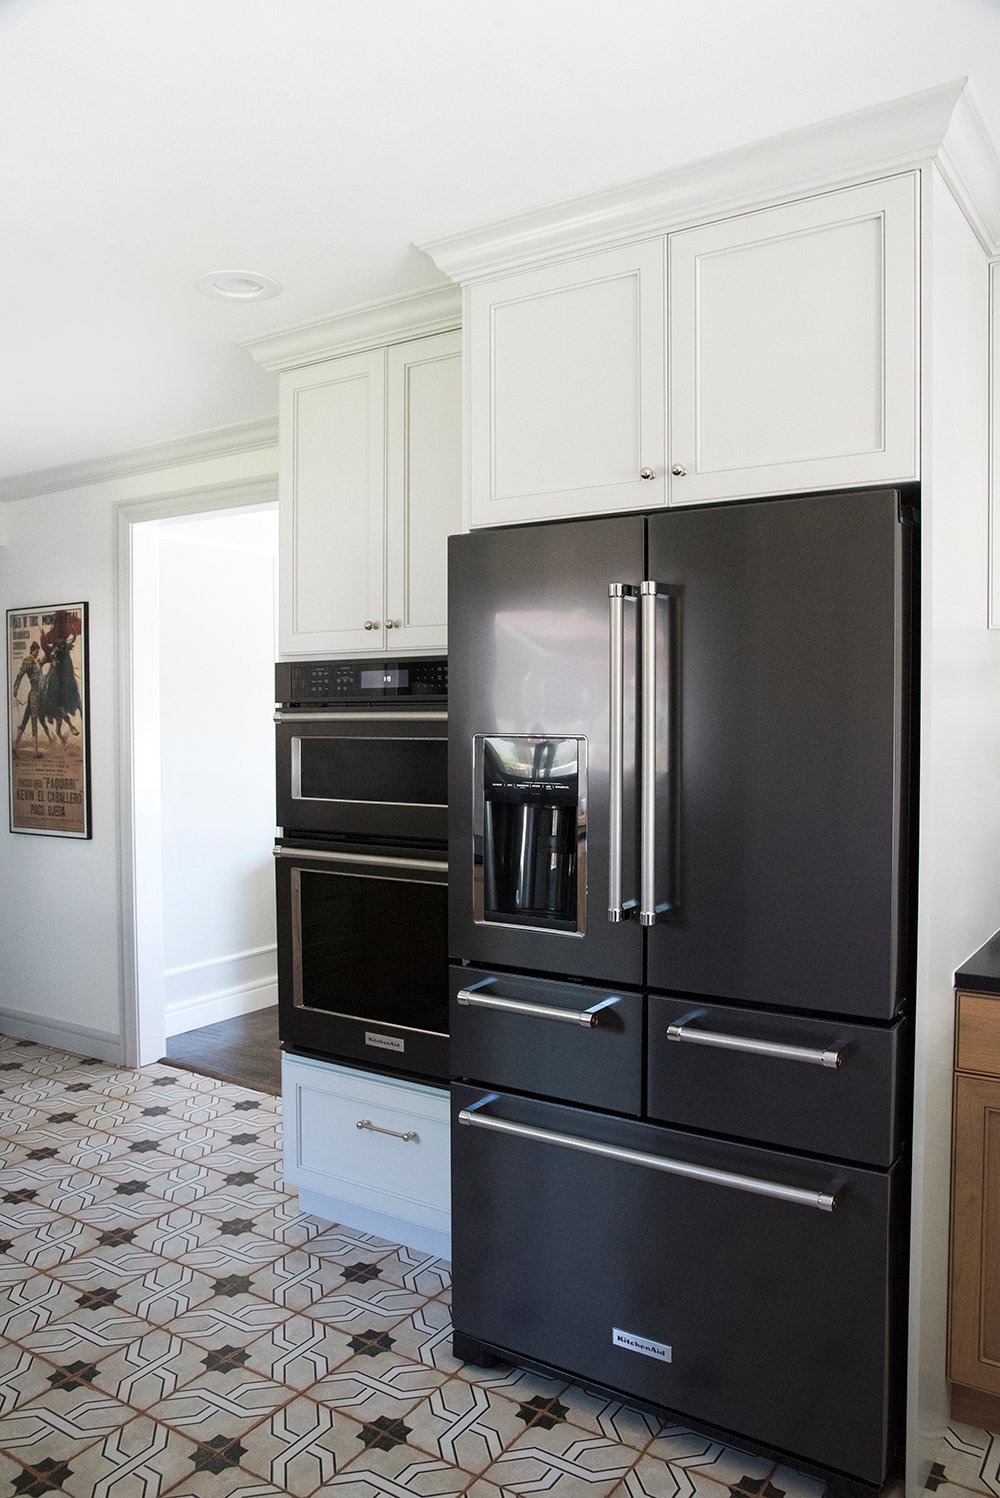 Black Stainless KitchenAid Appliances - Room For Tuesday